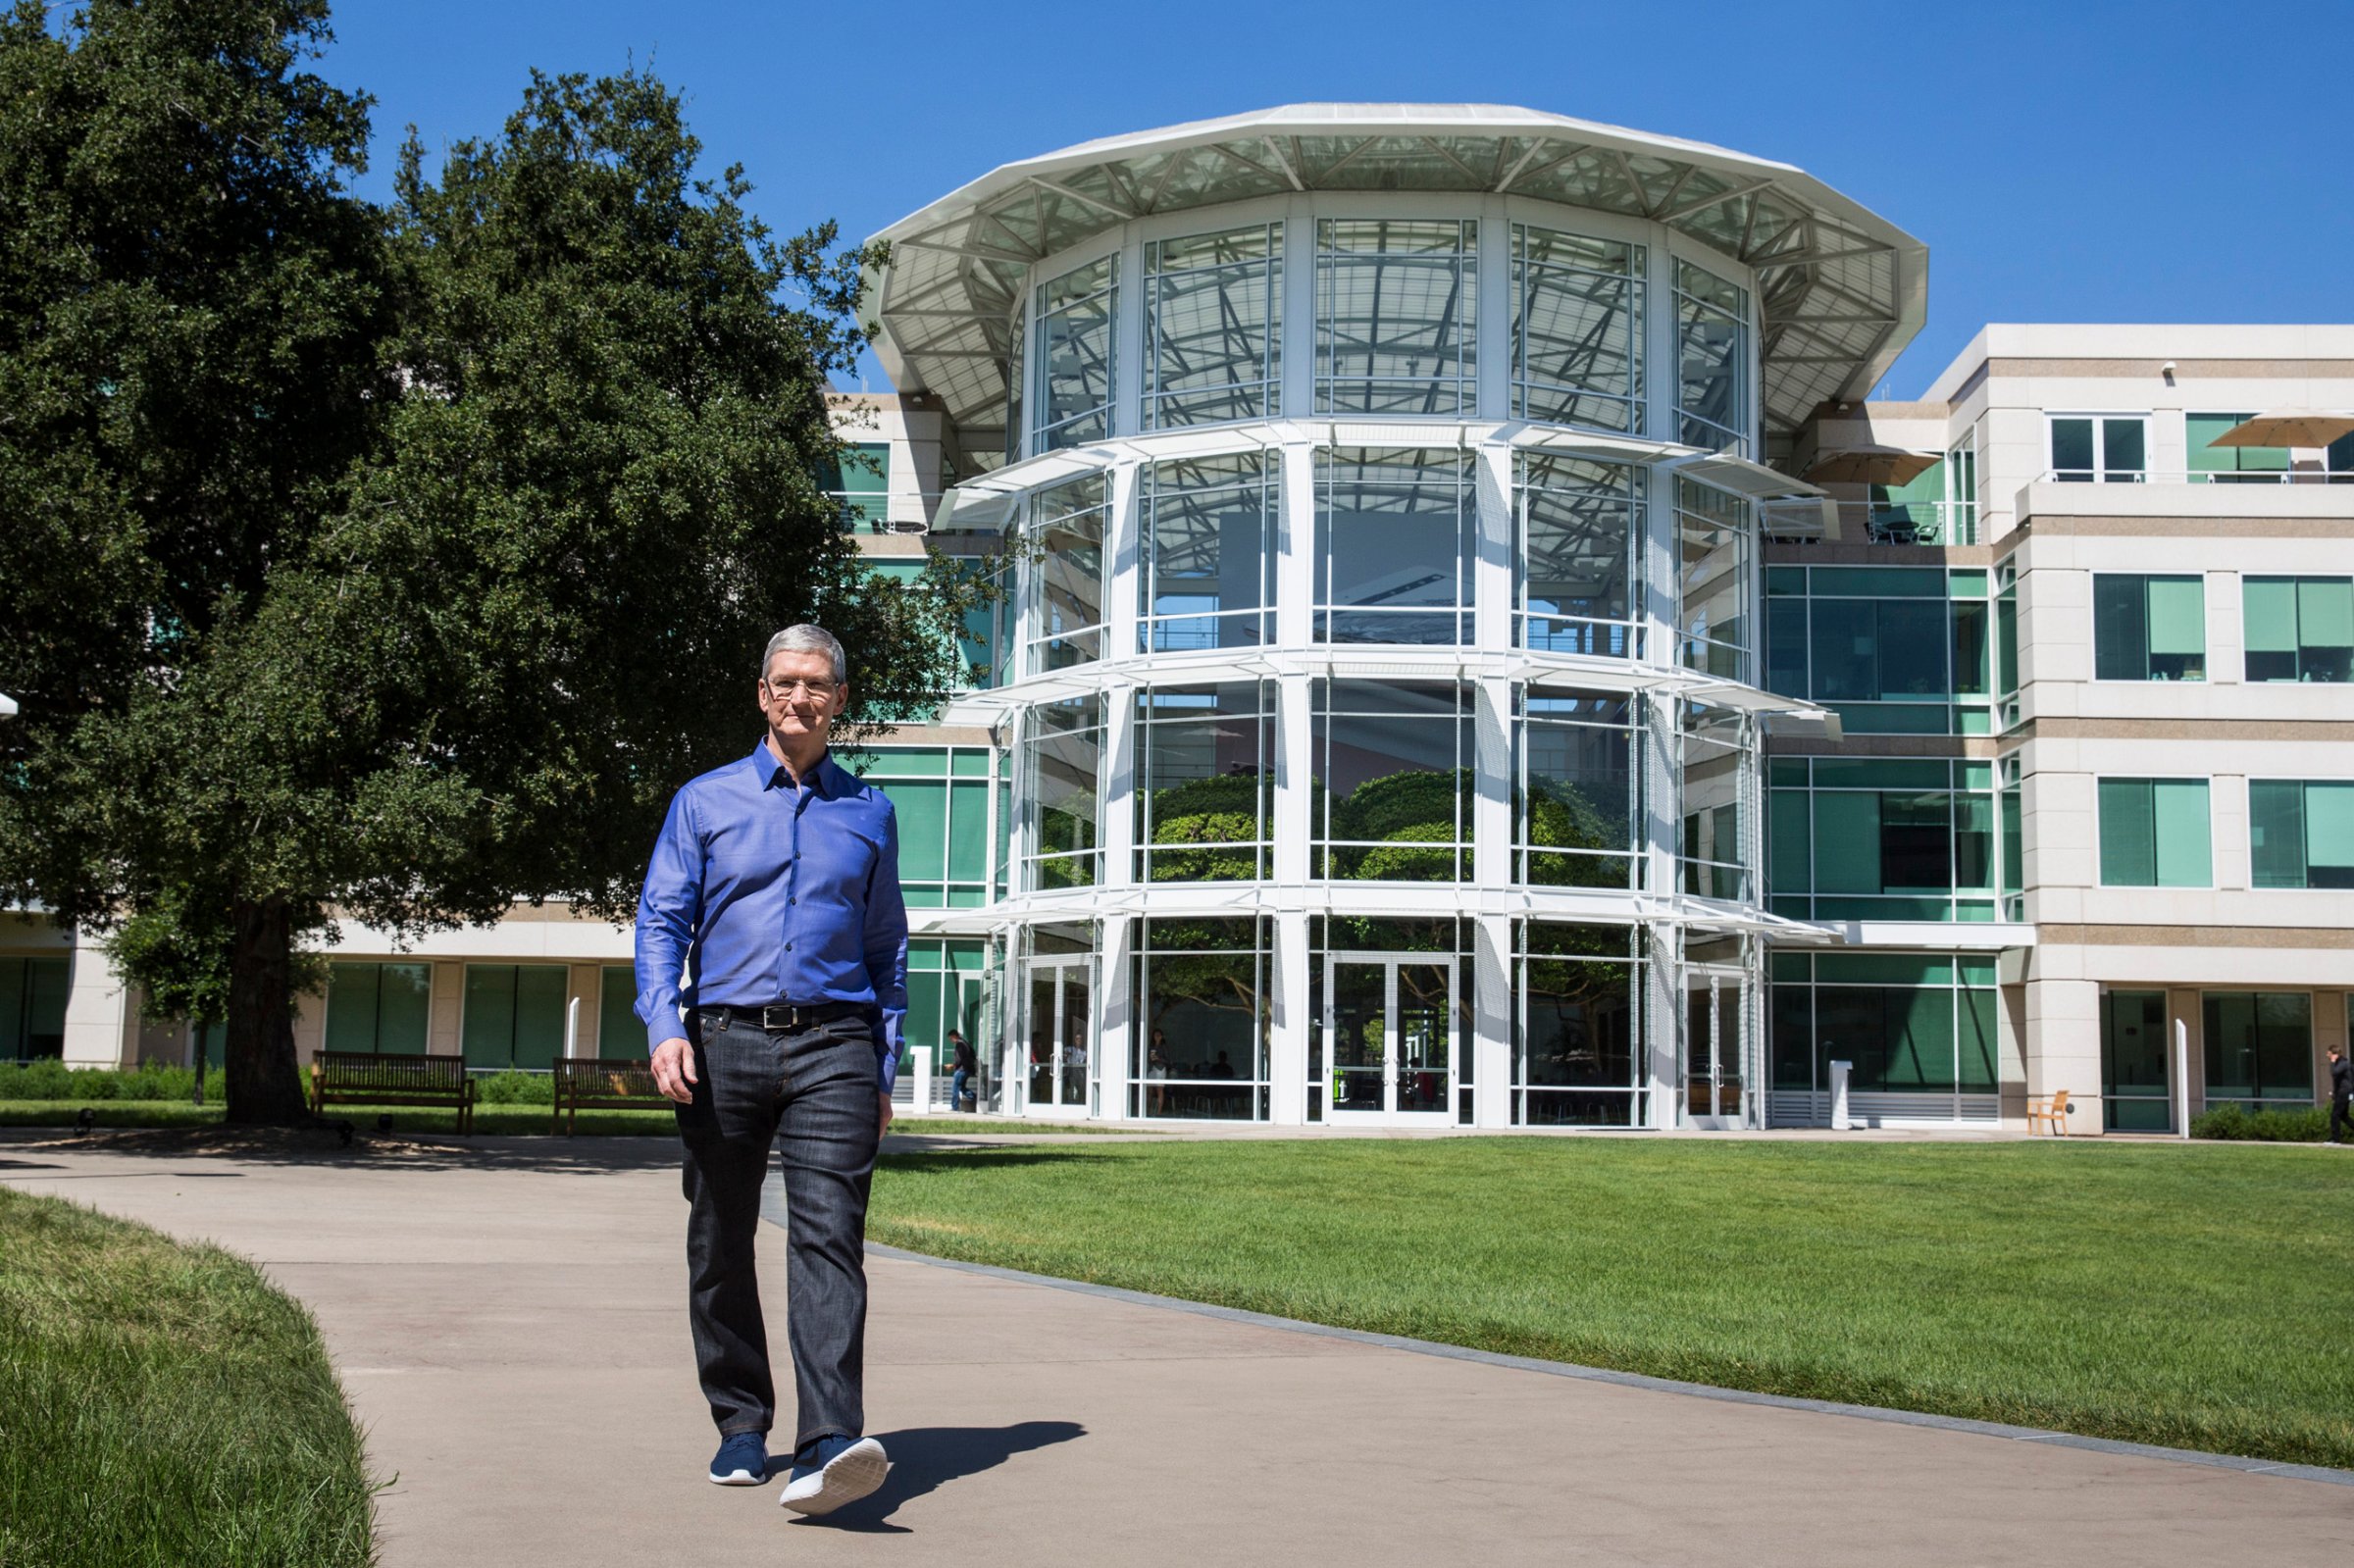 Apple CEO Tim Cook walks through Apple's global headquarters during a photo shoot in Cupertino, Calif. on July 28, 2016.